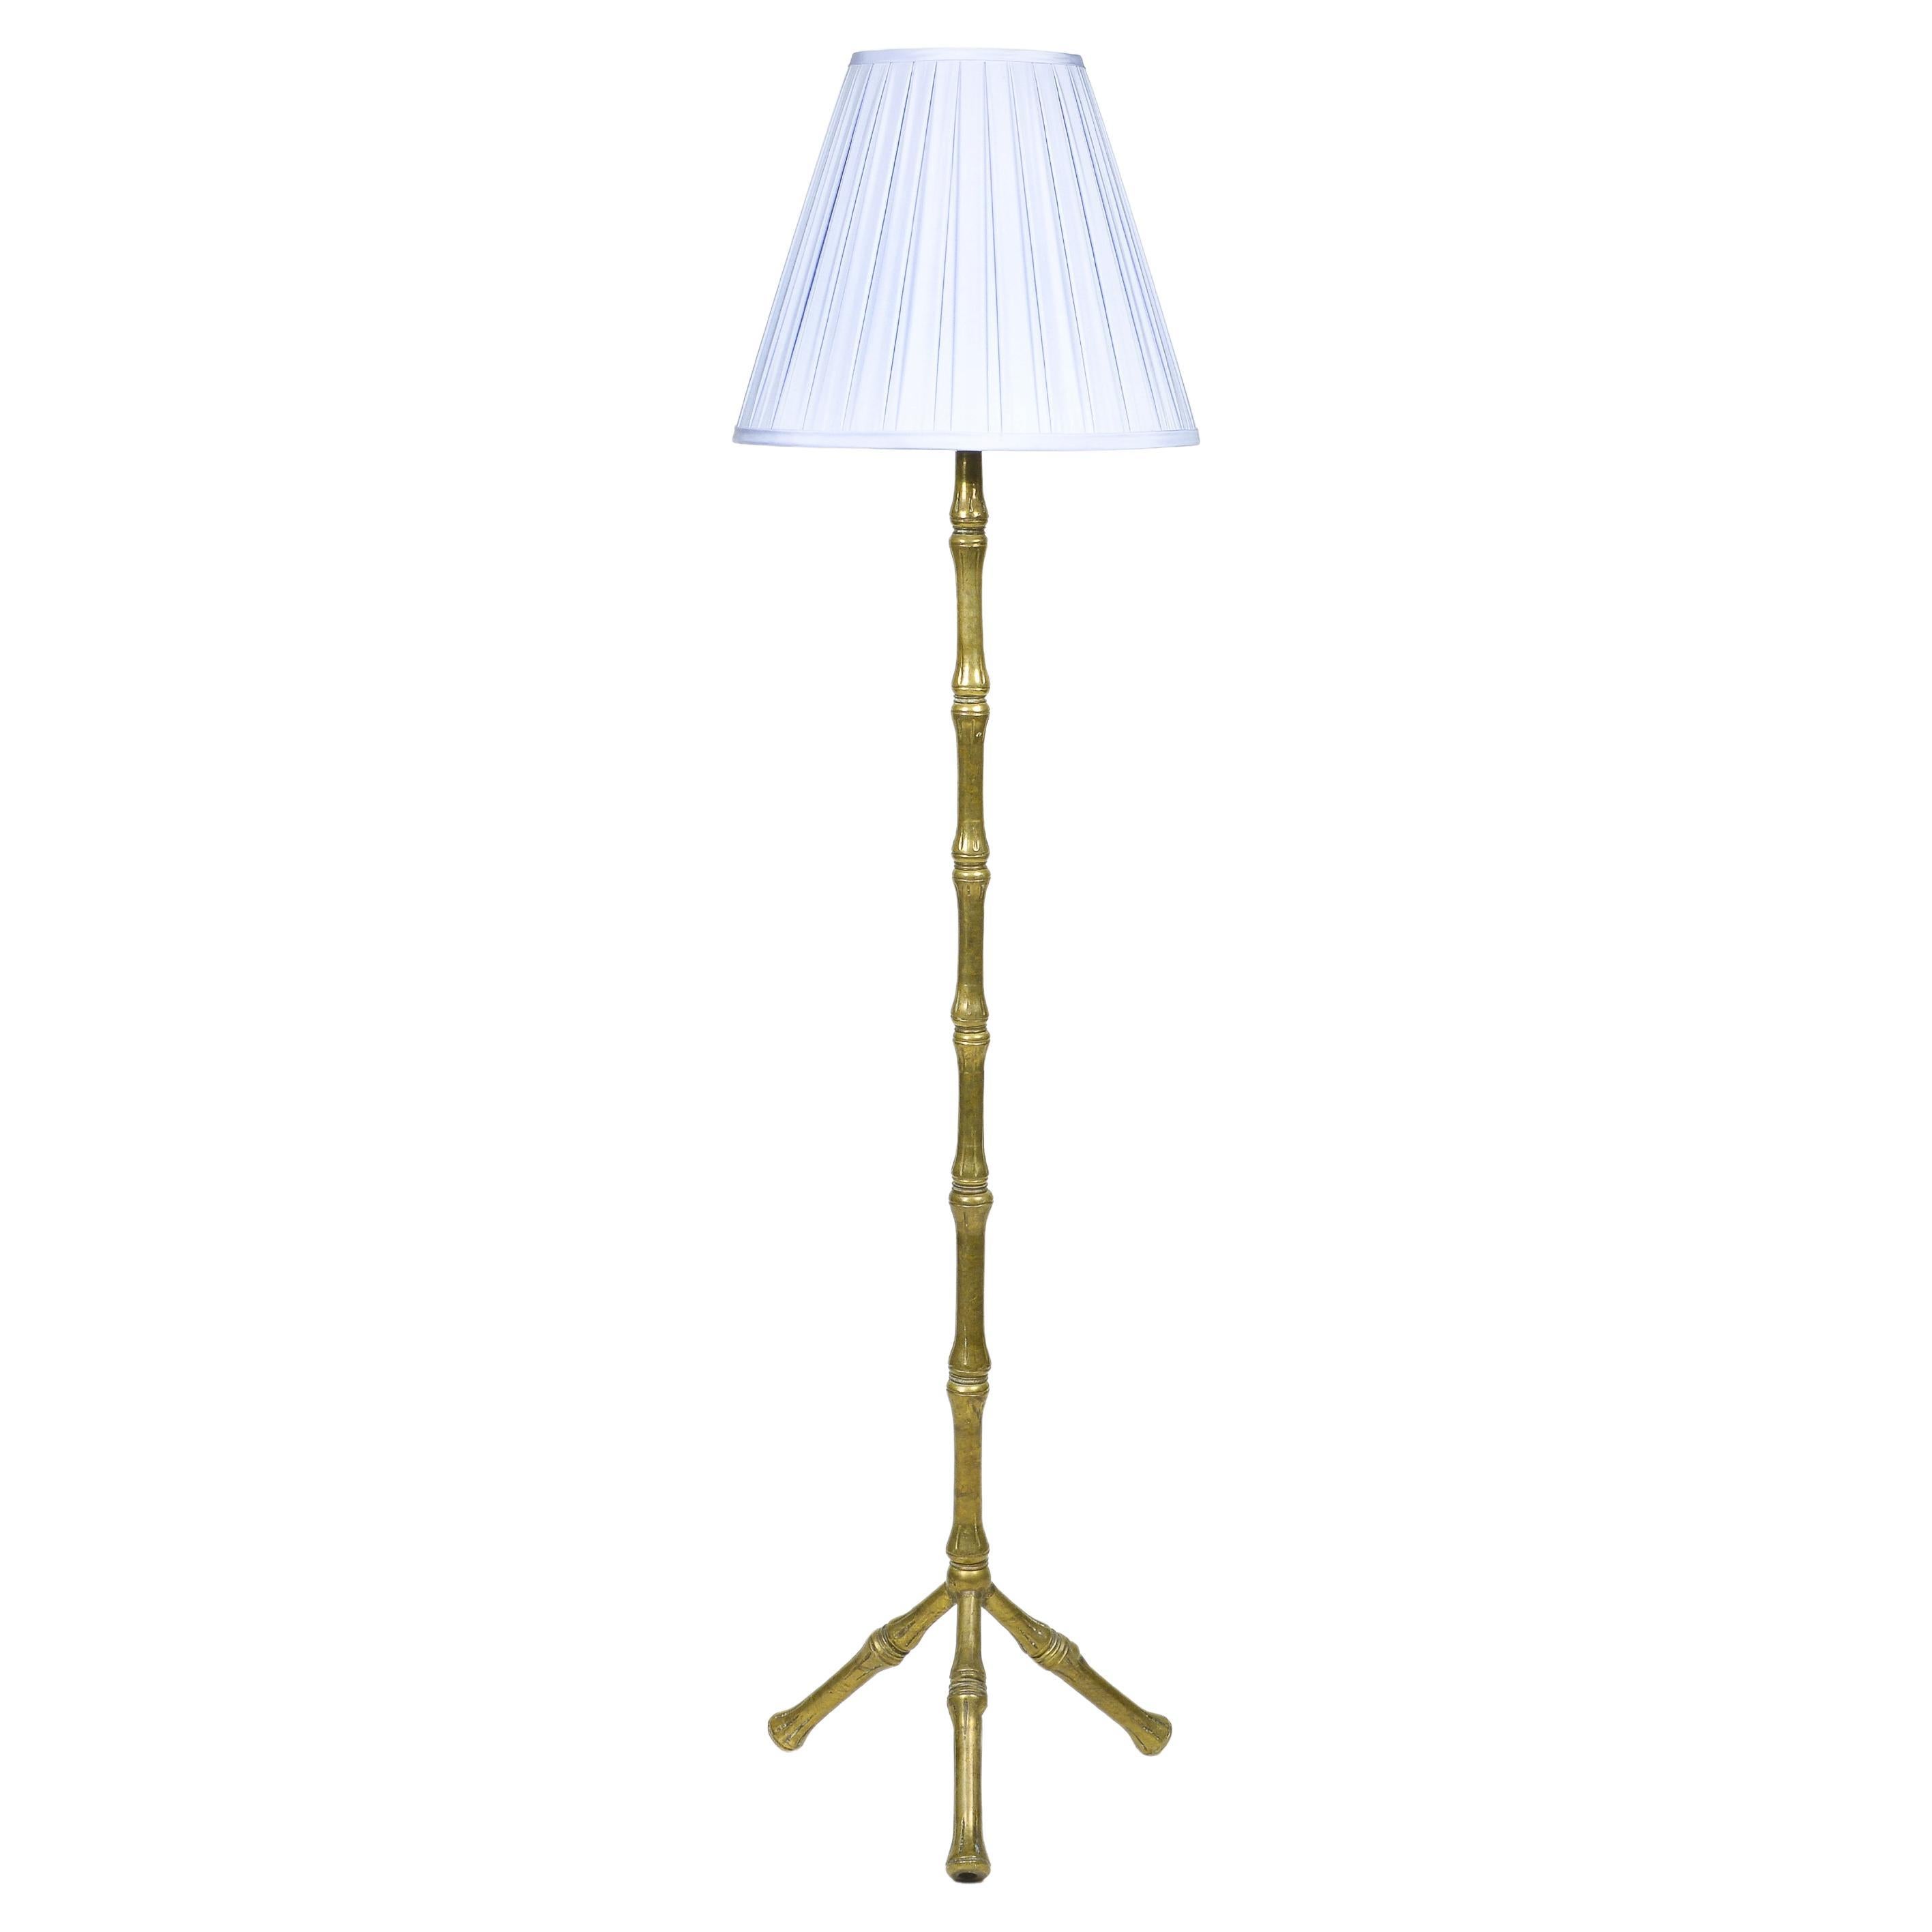 A Bronze Faux Bamboo Floor Lamp For Sale